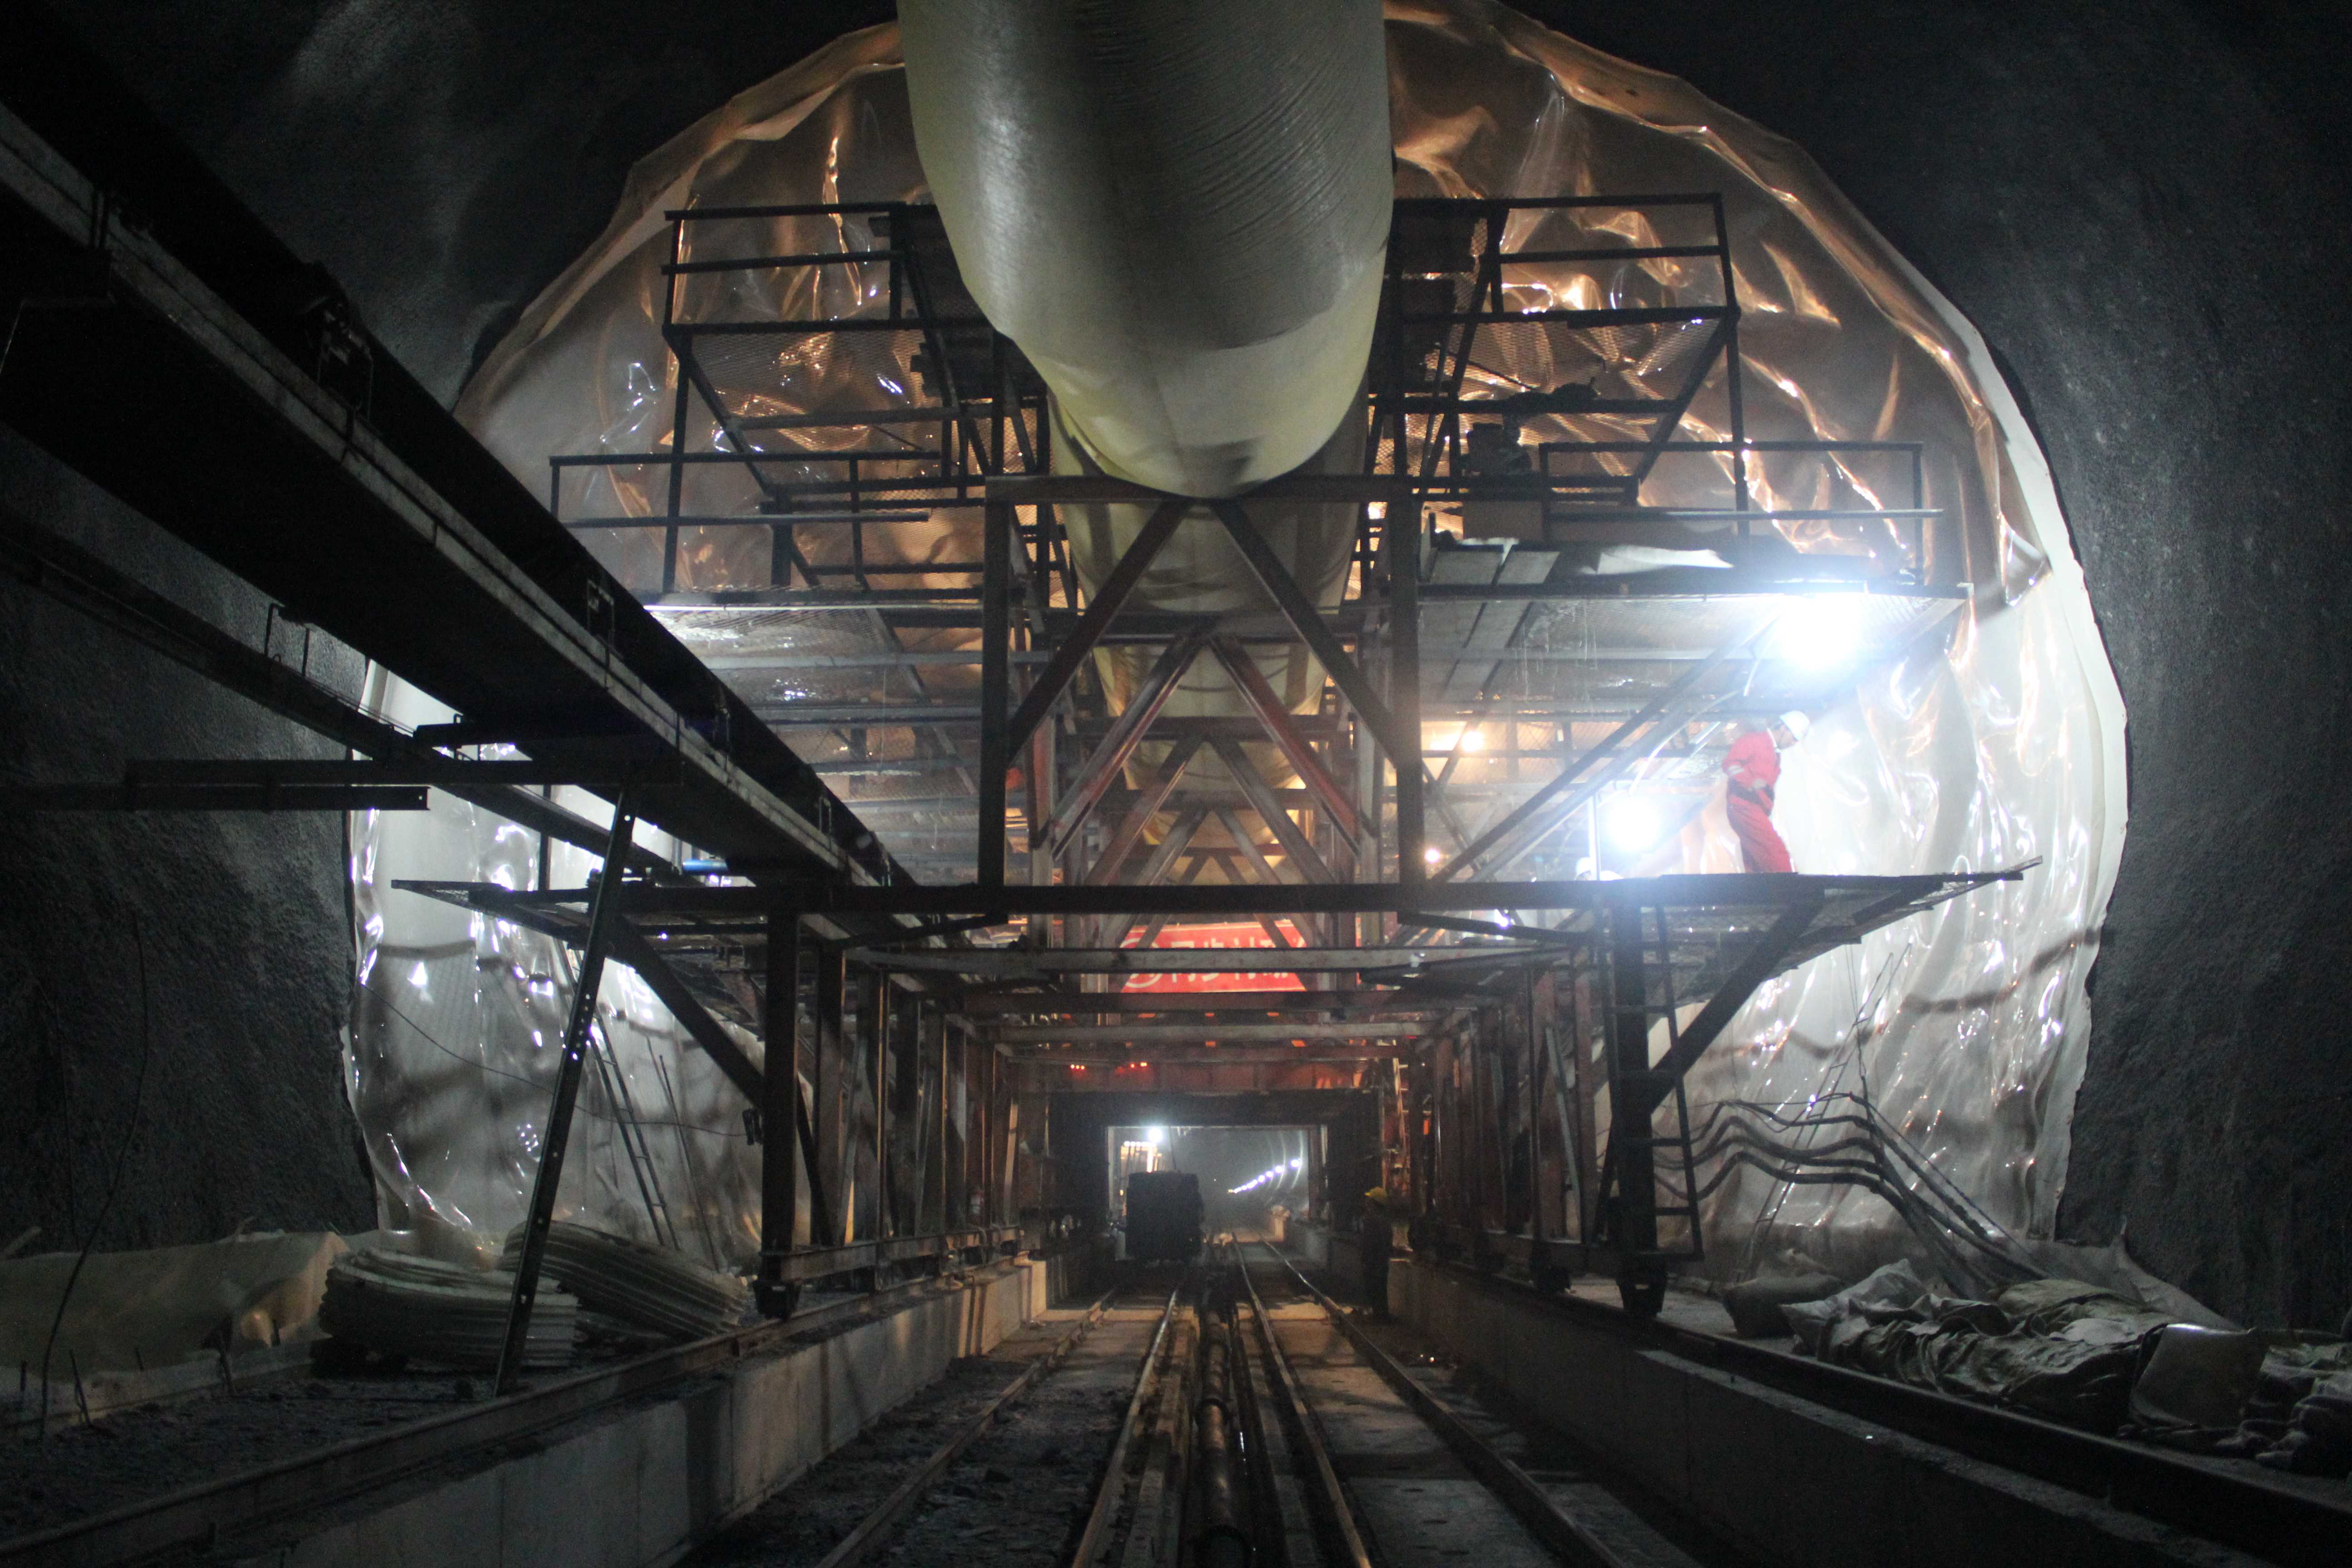 West Qinling Tunnel of Lanzhou-Sichuan（Lanyu） Railway Project